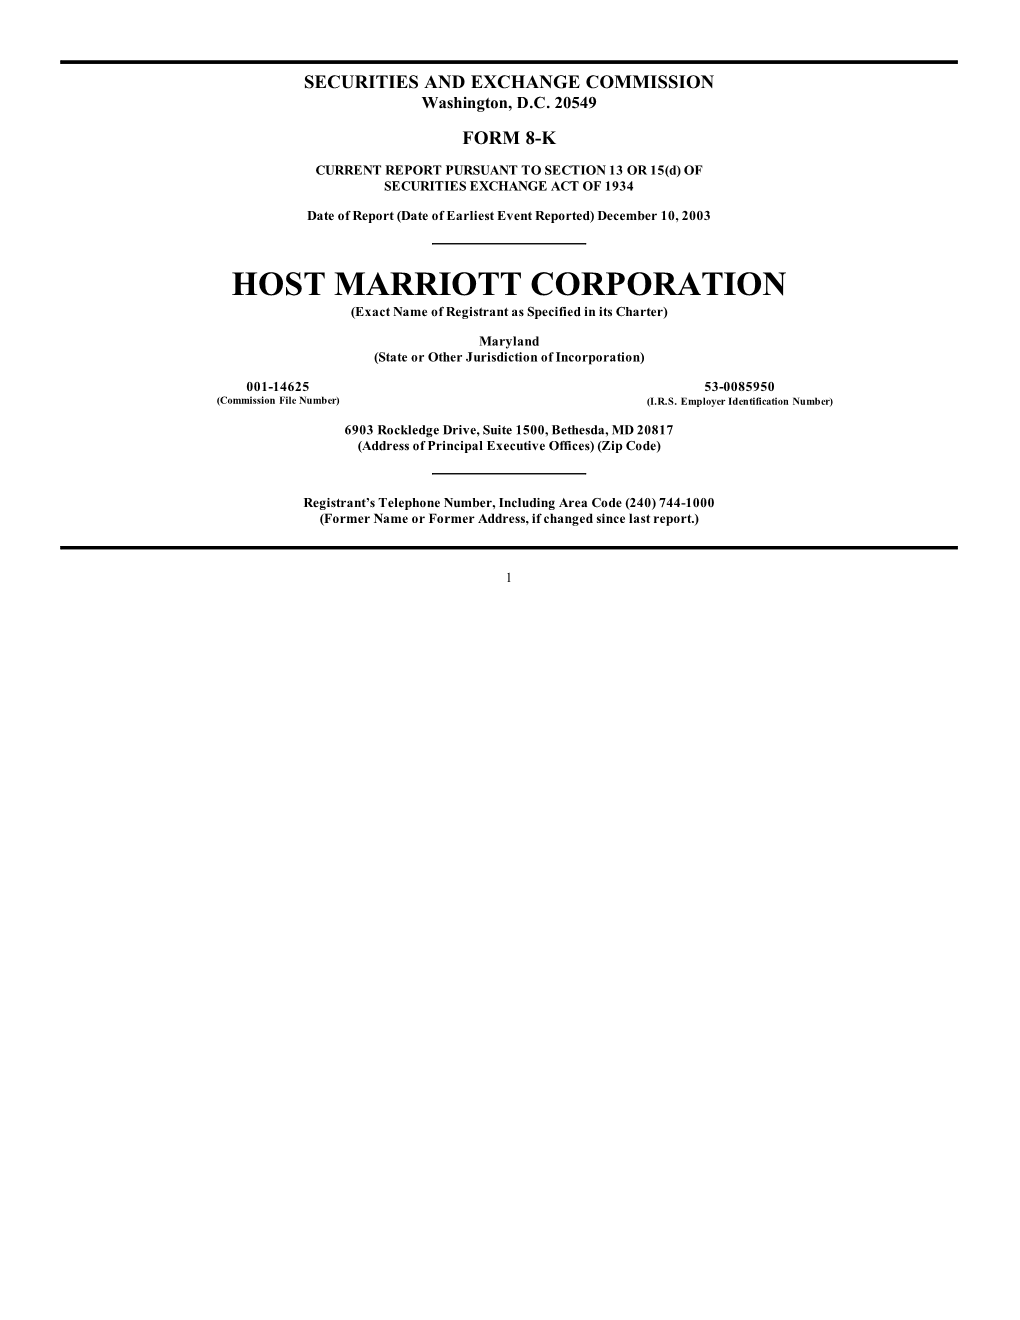 HOST MARRIOTT CORPORATION (Exact Name of Registrant As Specified in Its Charter)